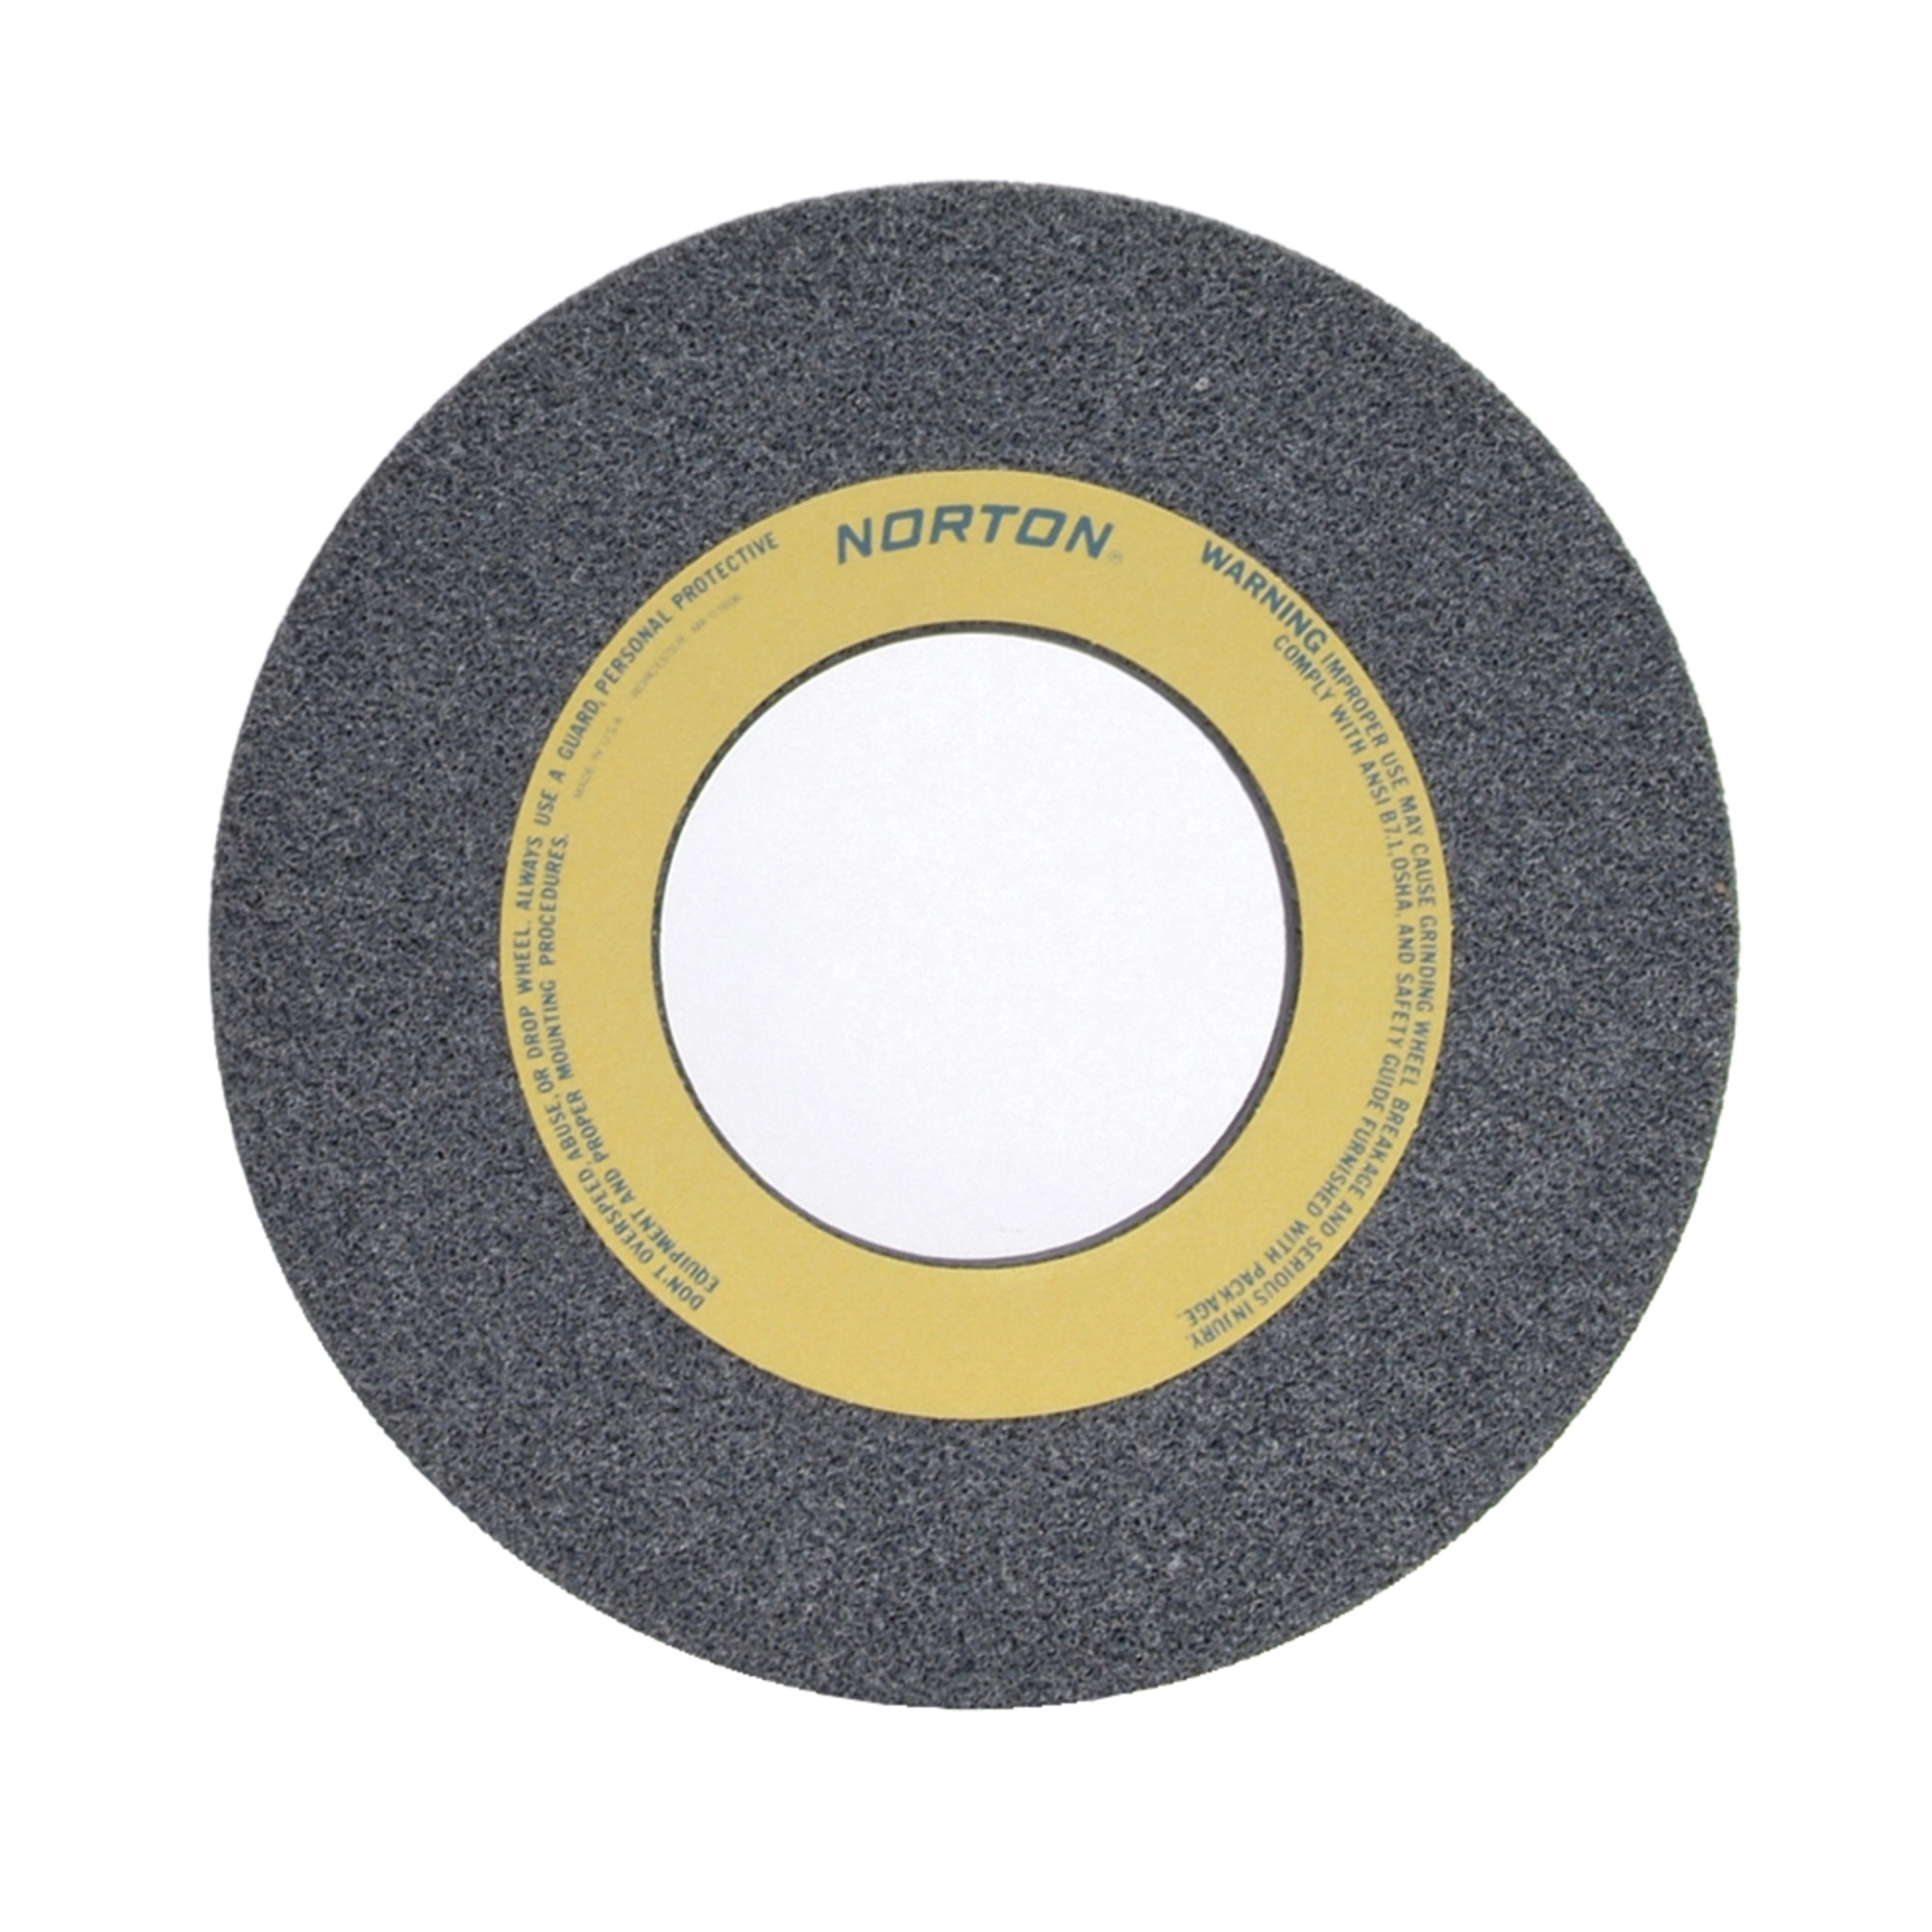 Norton® 66253363772 32A Straight Toolroom Wheel, 14 in Dia x 3/4 in THK, 5 in Center Hole, 60 Grit, Aluminum Oxide Abrasive